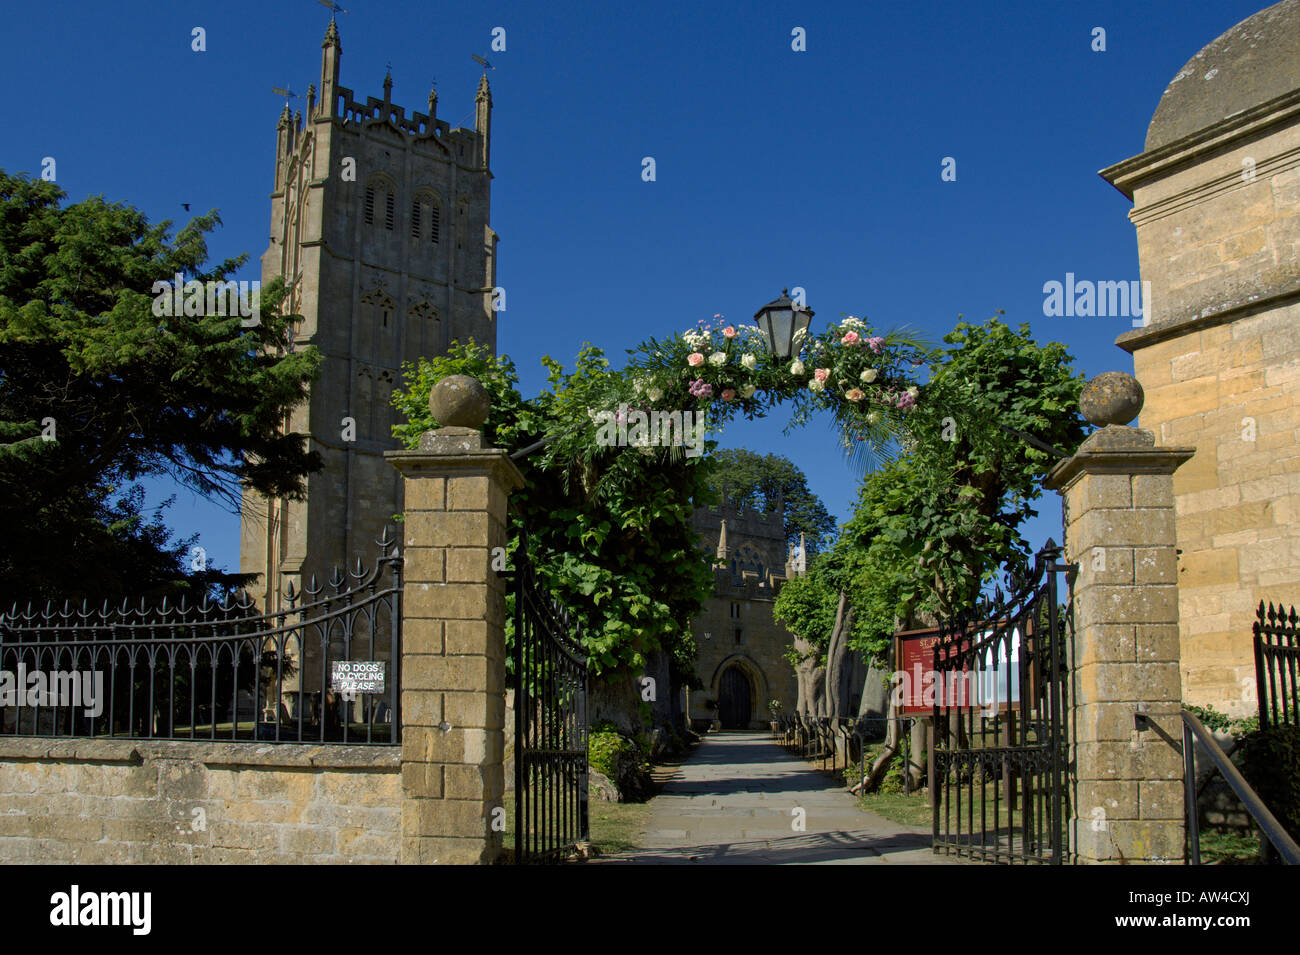 St James s Chiesa Chipping Campden Gloucestershire Inghilterra Luglio 2006 Foto Stock